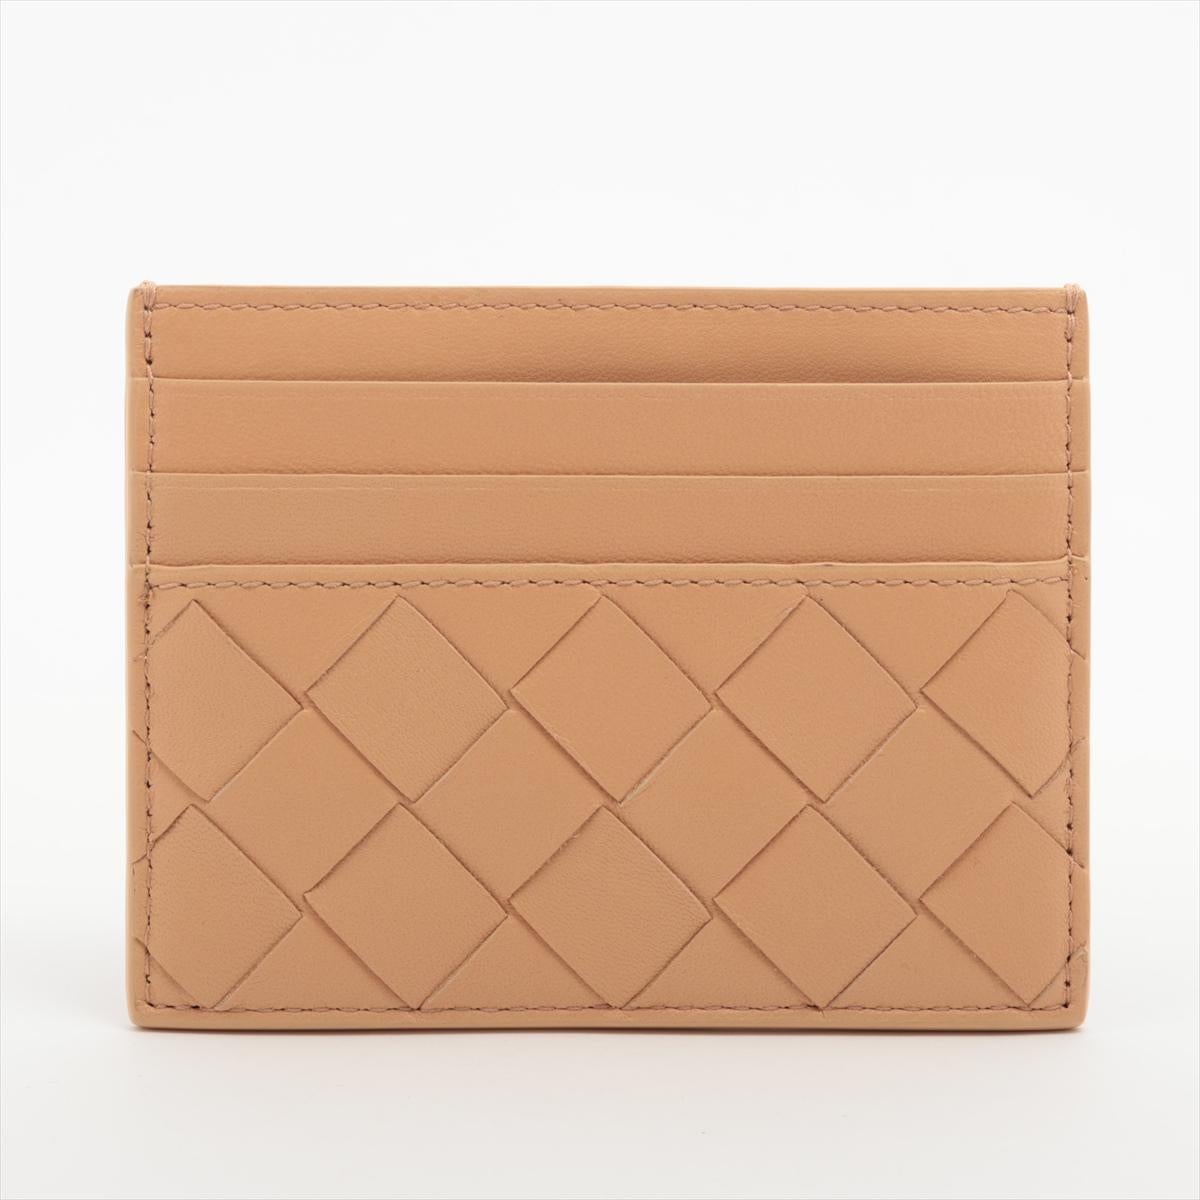 The Bottega Veneta Intrecciato Leather Card Case in Beige is a refined and versatile accessory that showcases the brand's iconic craftsmanship. Crafted from high-quality leather using Bottega Veneta's signature Intrecciato weaving technique, the